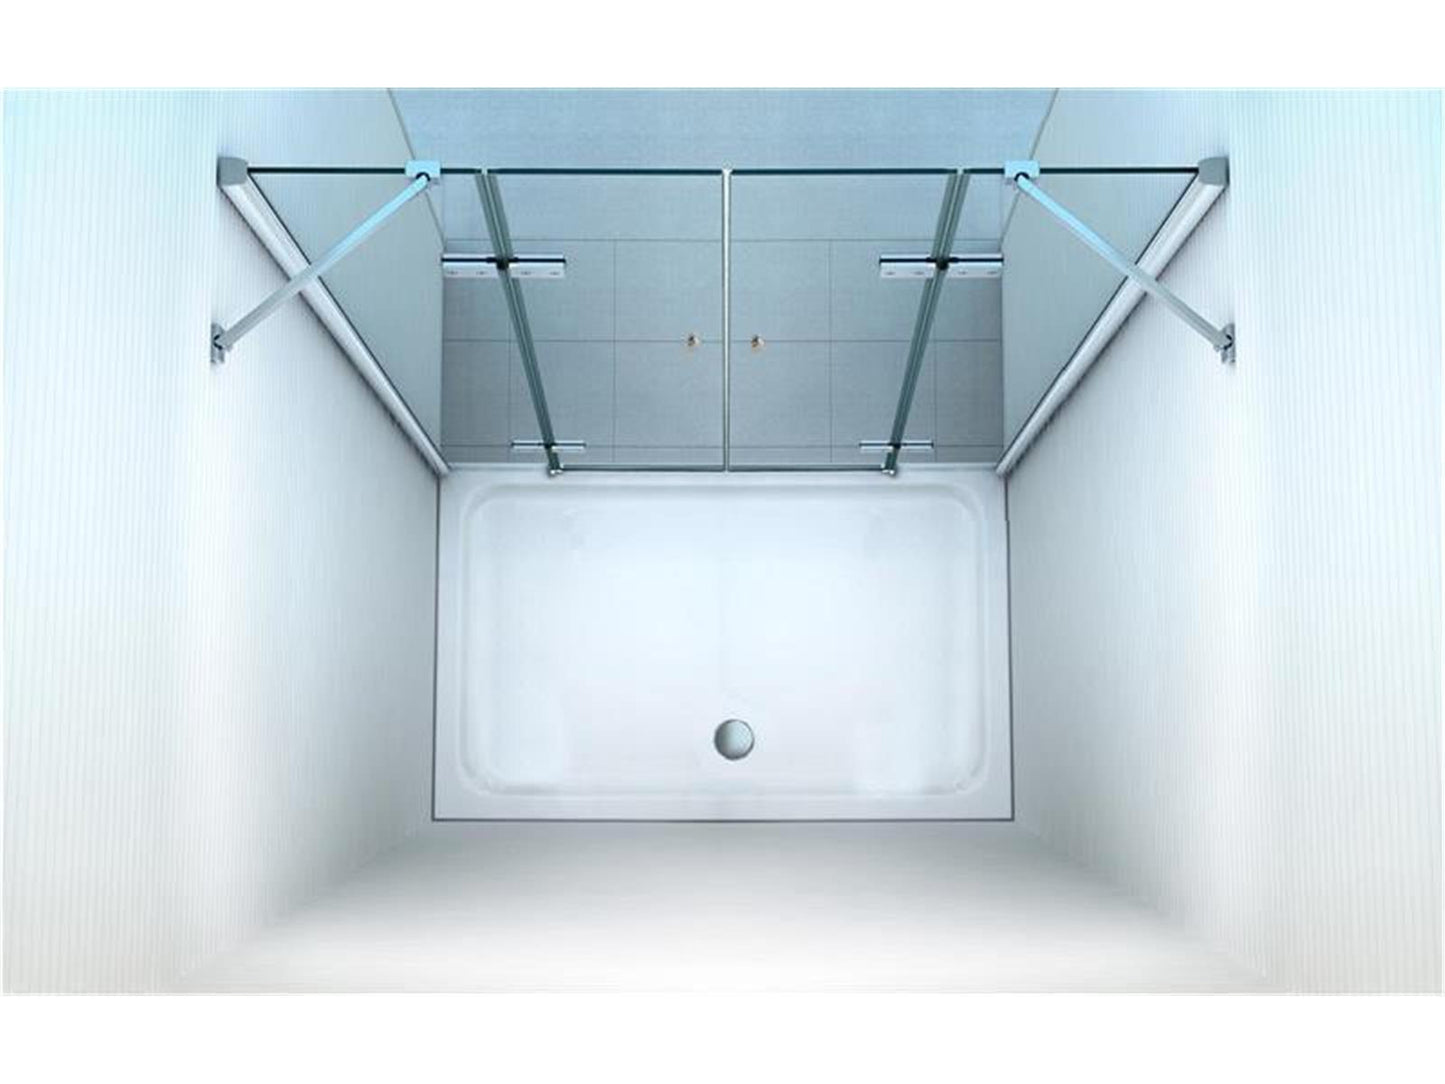 GlasHomeCenter - Utah niche cabin (160 x 180 cm) - 8mm toughened safety glass - without shower tray